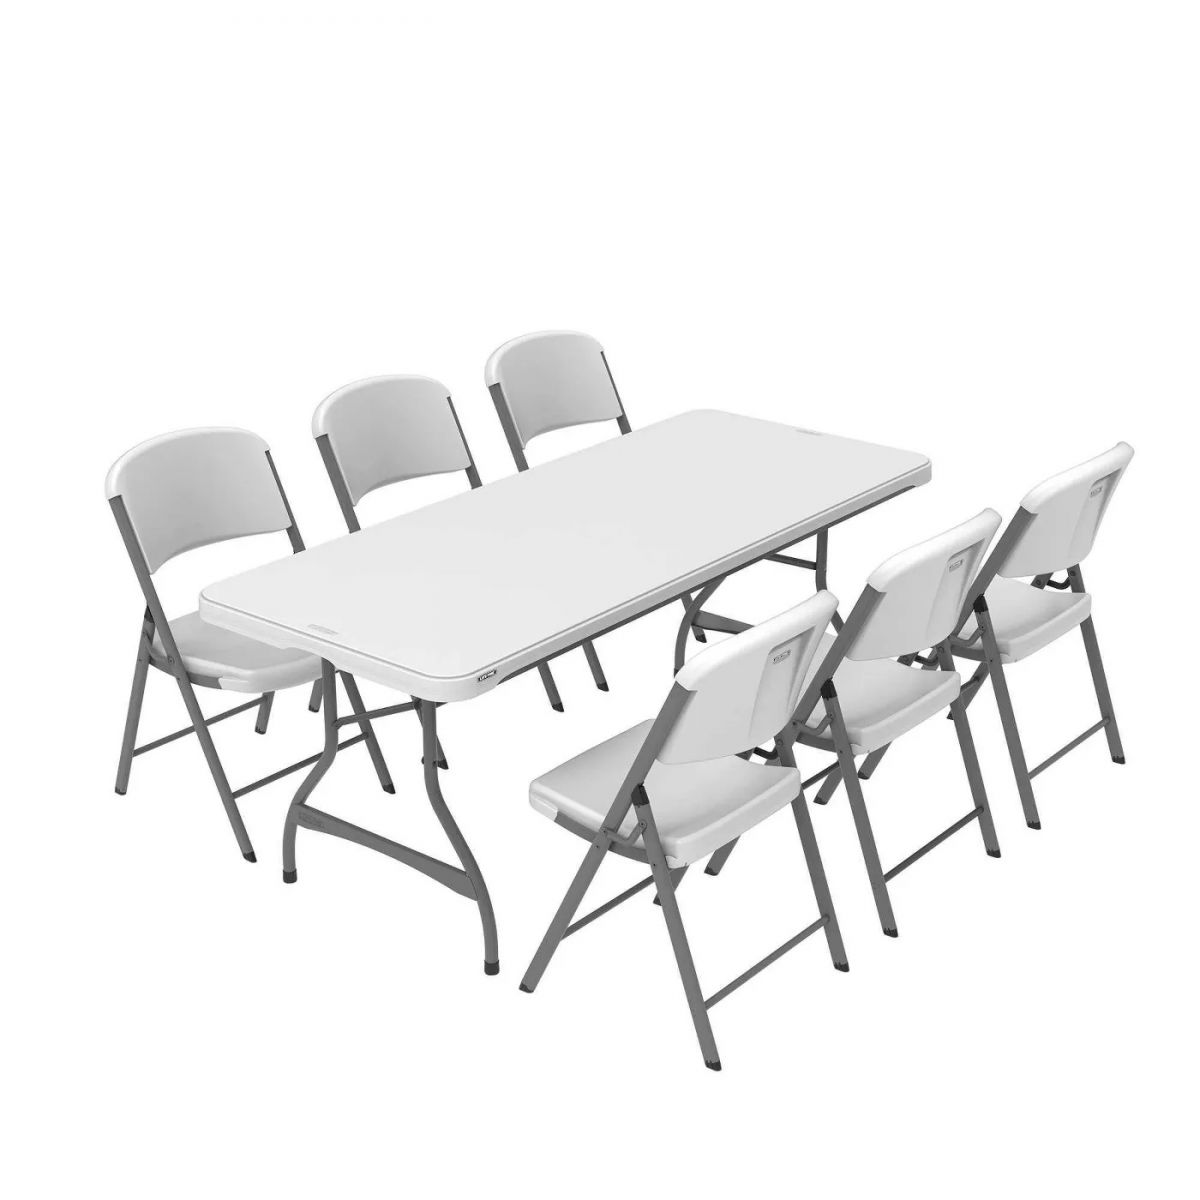 Tables and Chairs Newnan